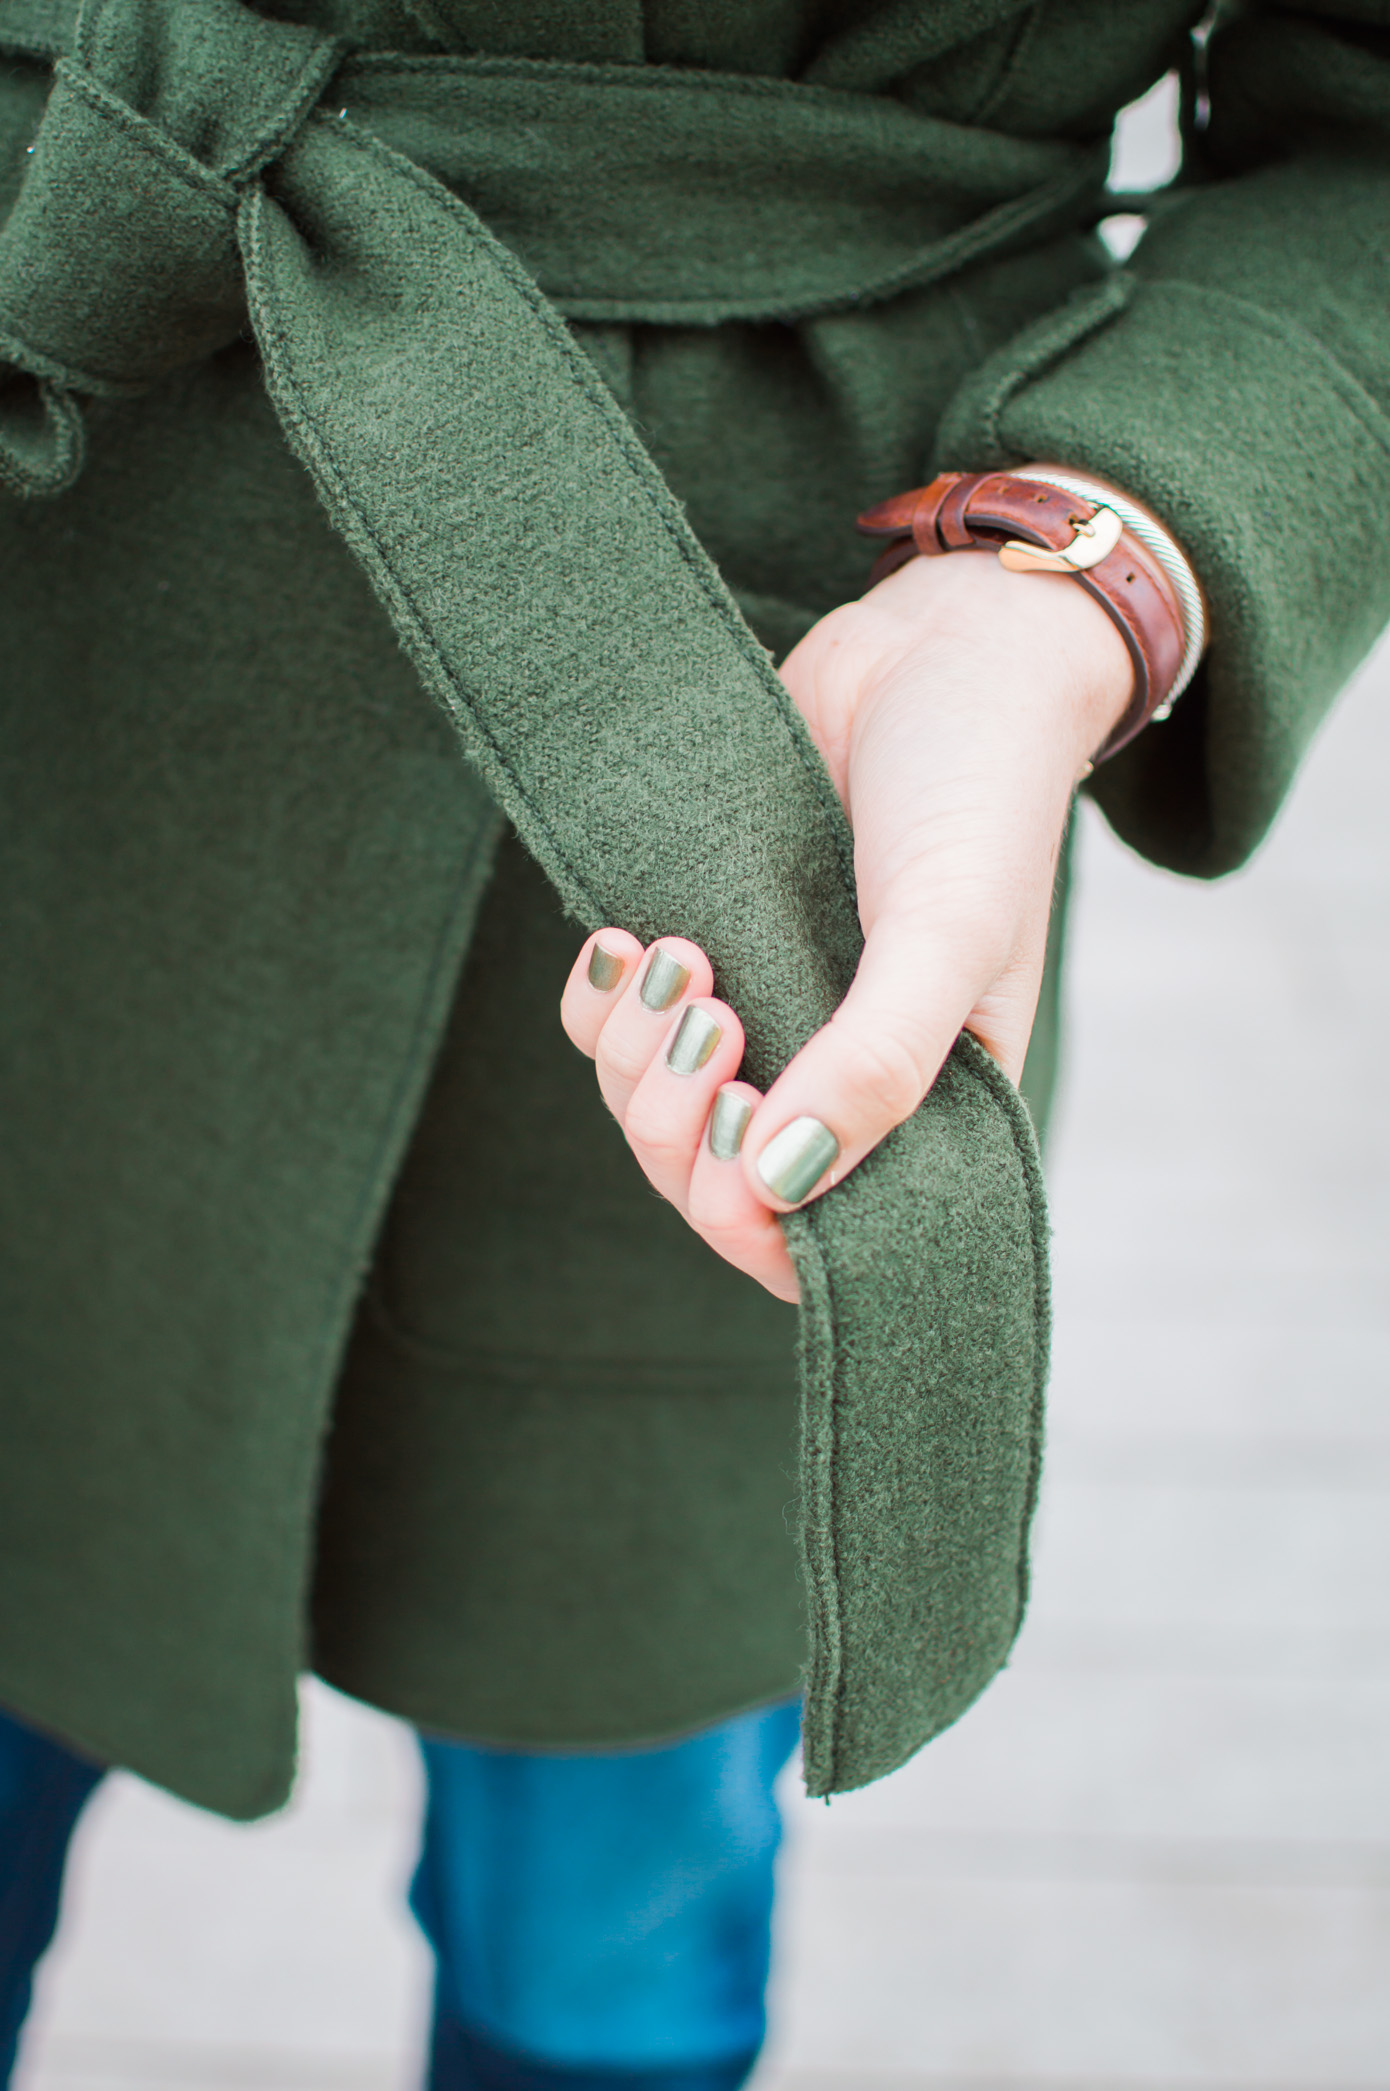 Transitional Wrap Coat | Olive Wrap Coat for Winter | Louella Reese Life & Style Blog